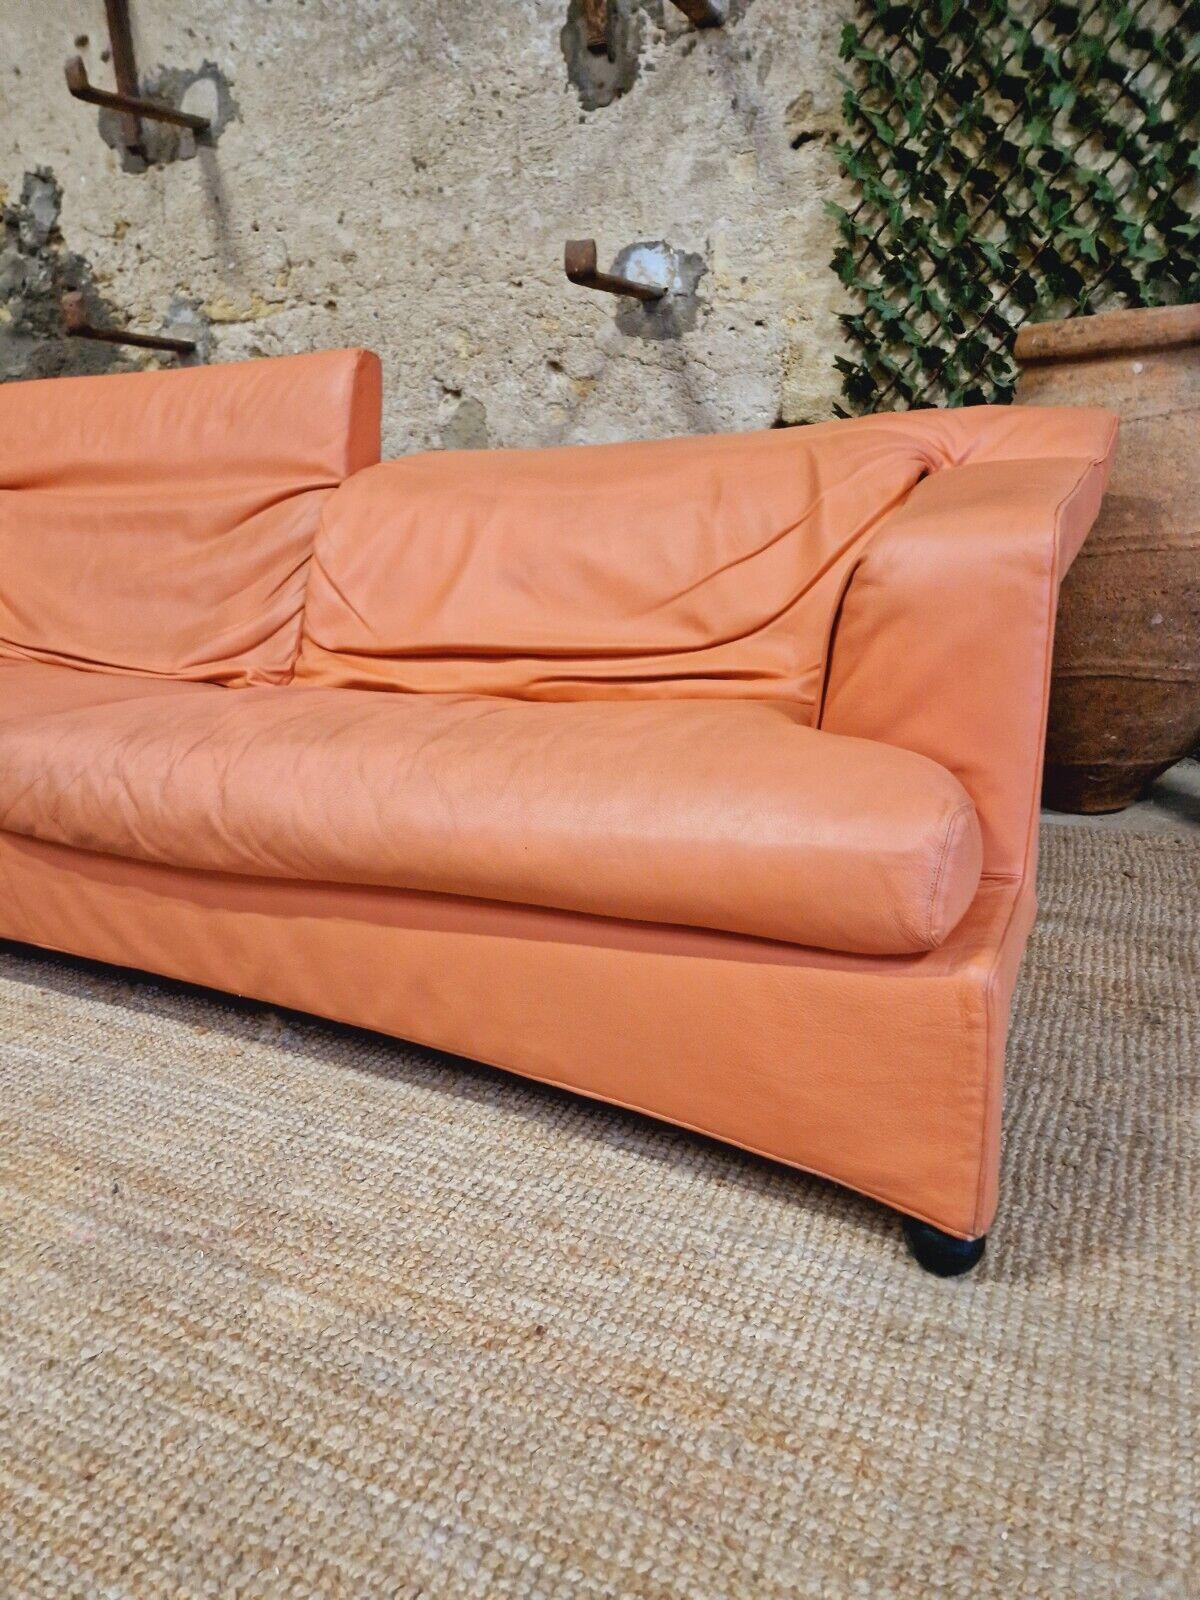 1980s Paolo Piva Sofa Italian Pink Leather For Sale 4